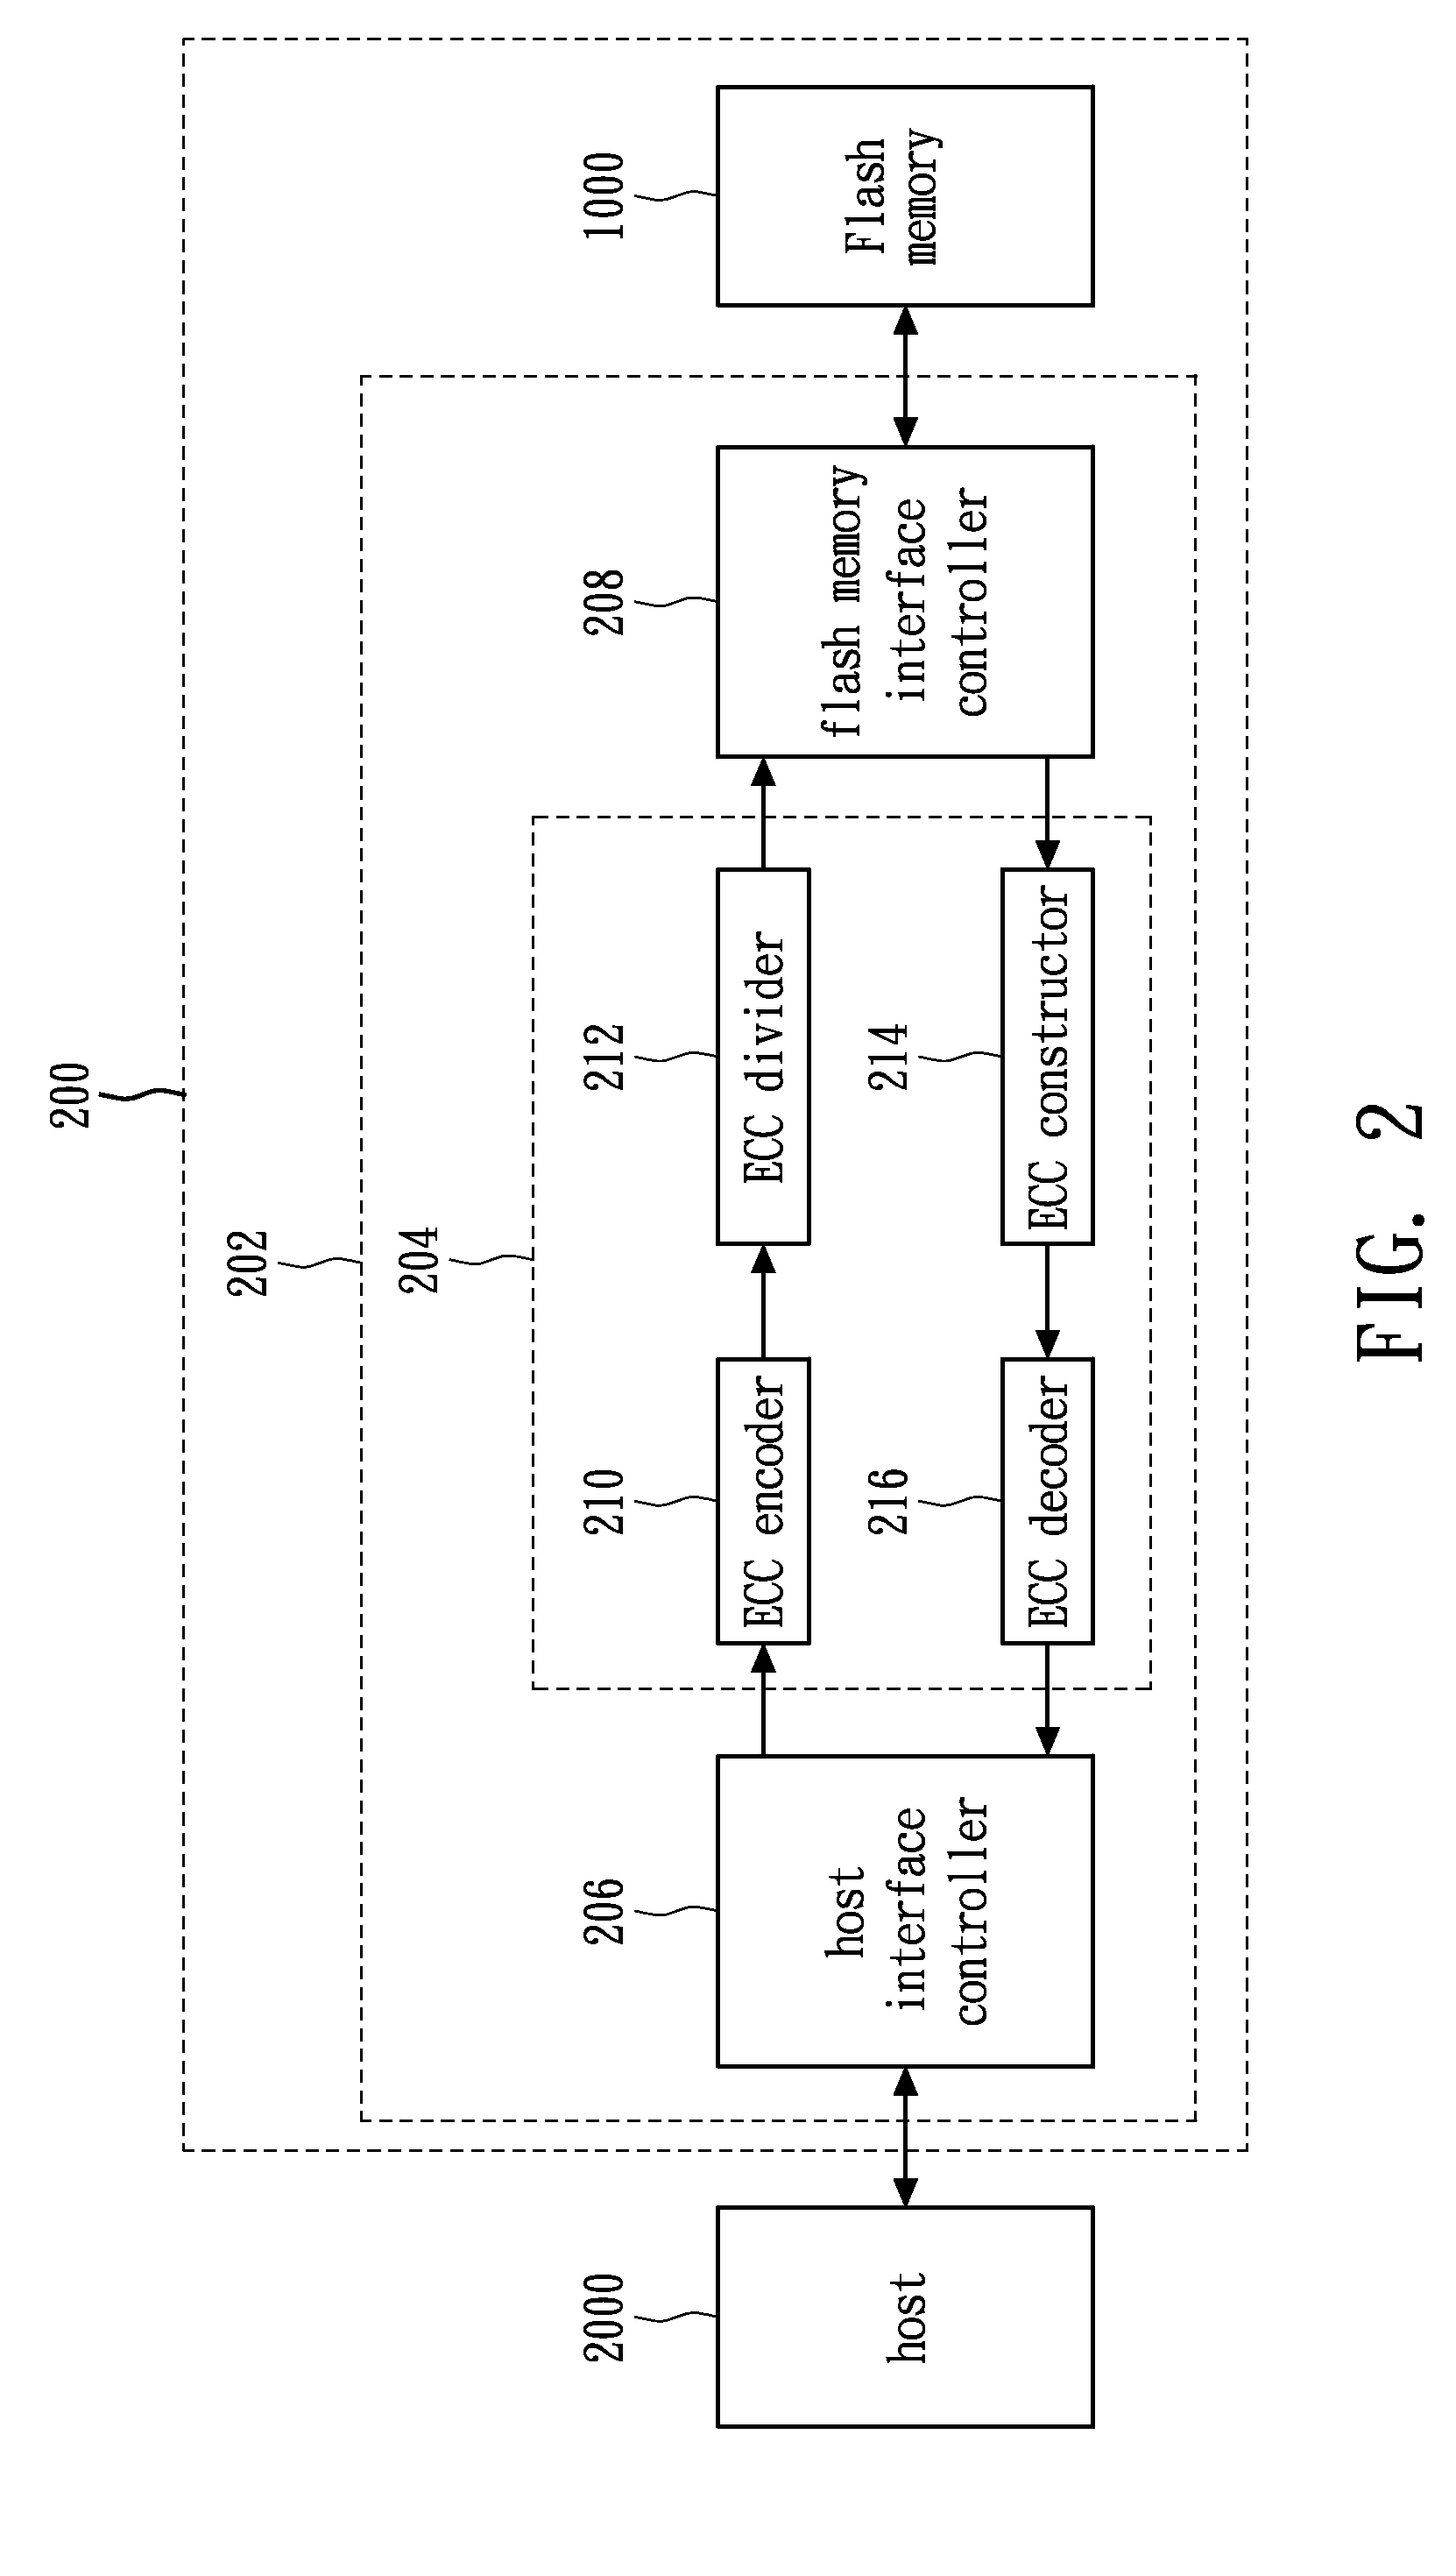 Flash memory controller, error correction code controller therein, and the methods and systems thereof